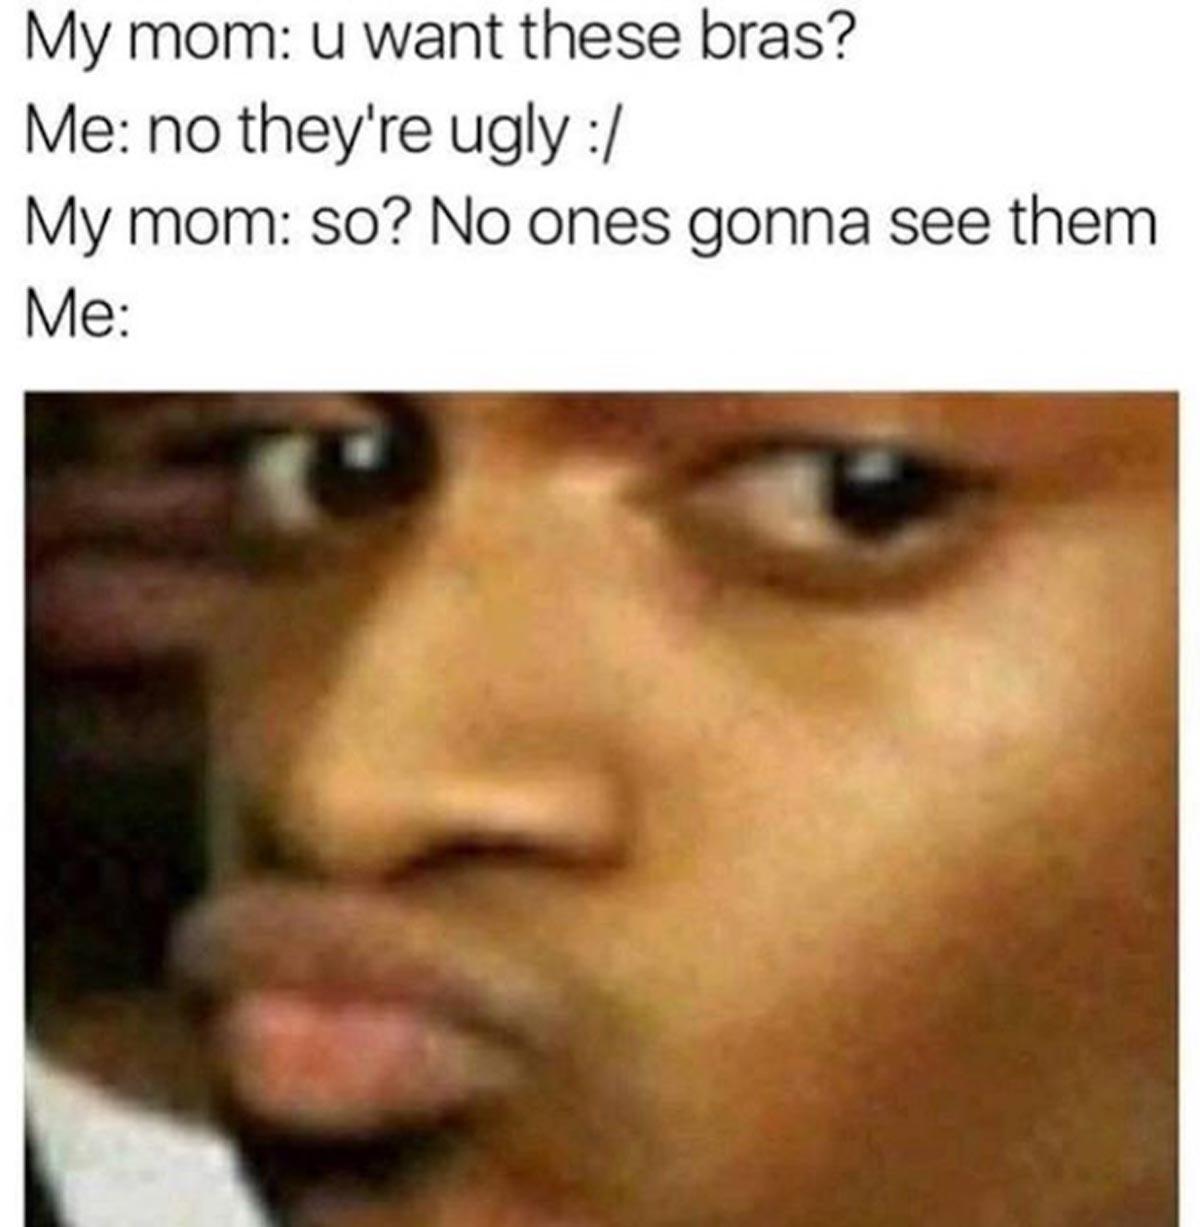 funny sex memes - coin master memes funny - My mom u want these bras? Me no they're ugly My mom so? No ones gonna see them Me